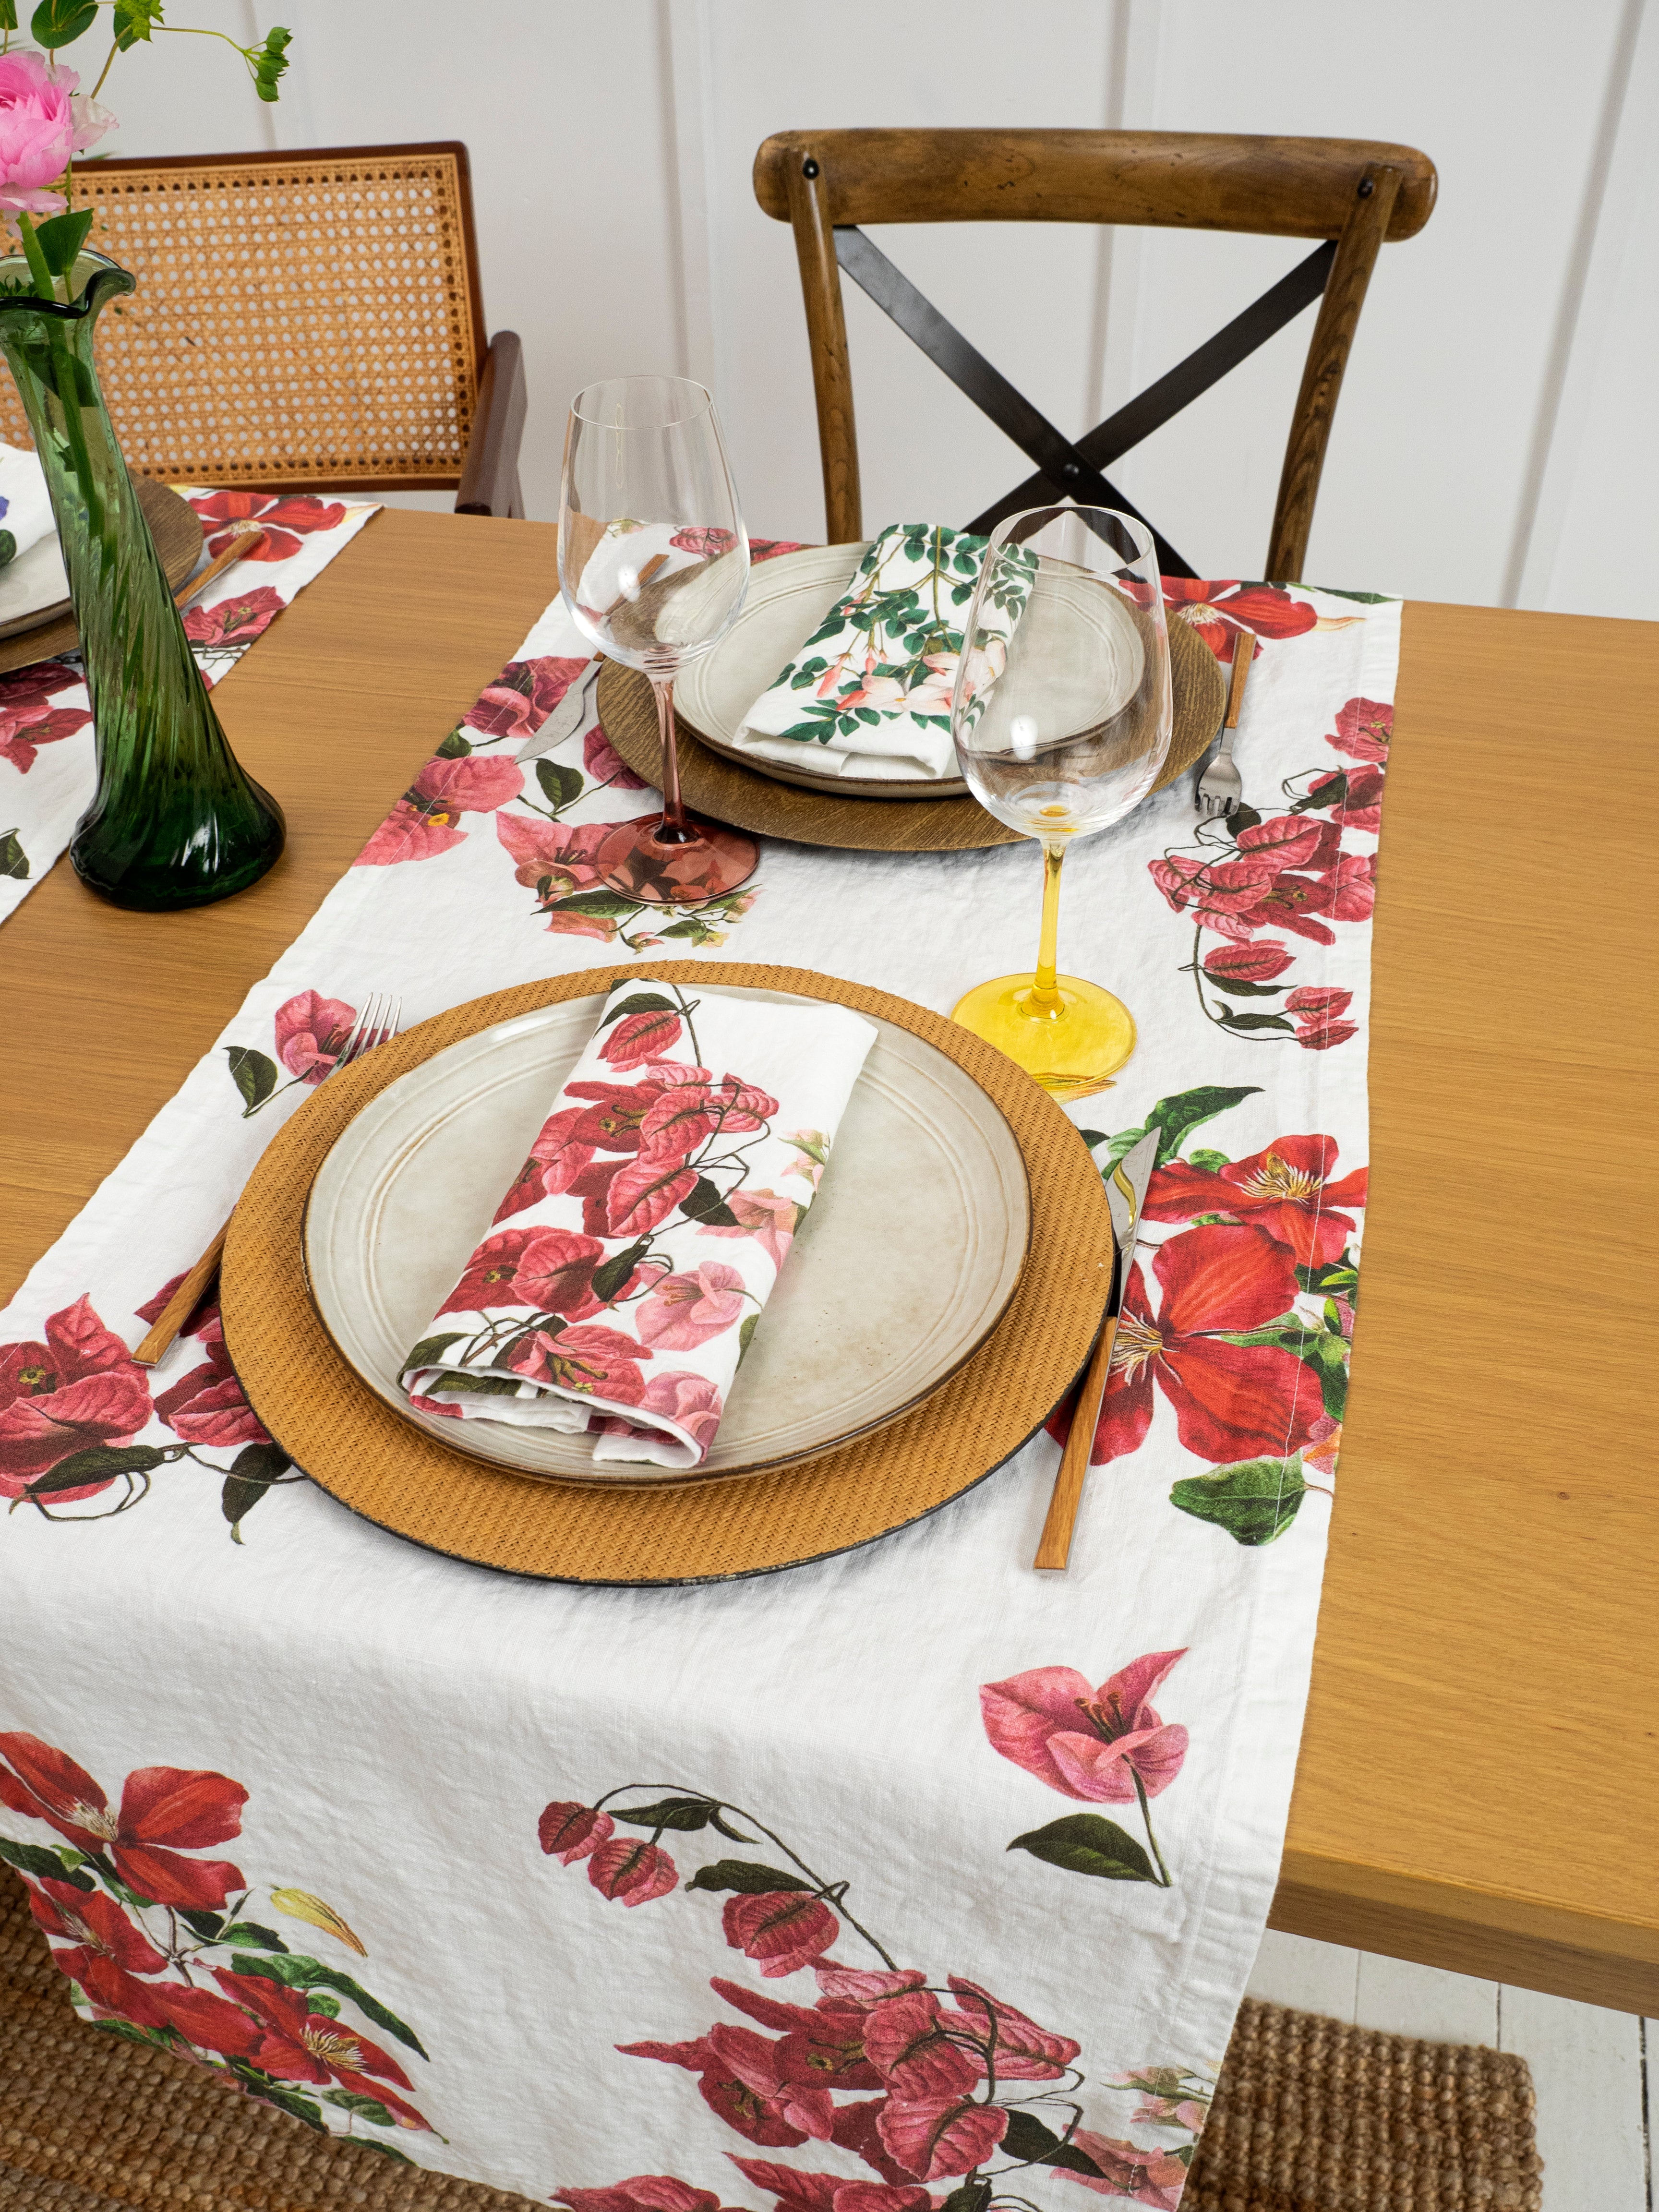 The Linoroom “Climbing Flowers,” Pure linen printed table runner.